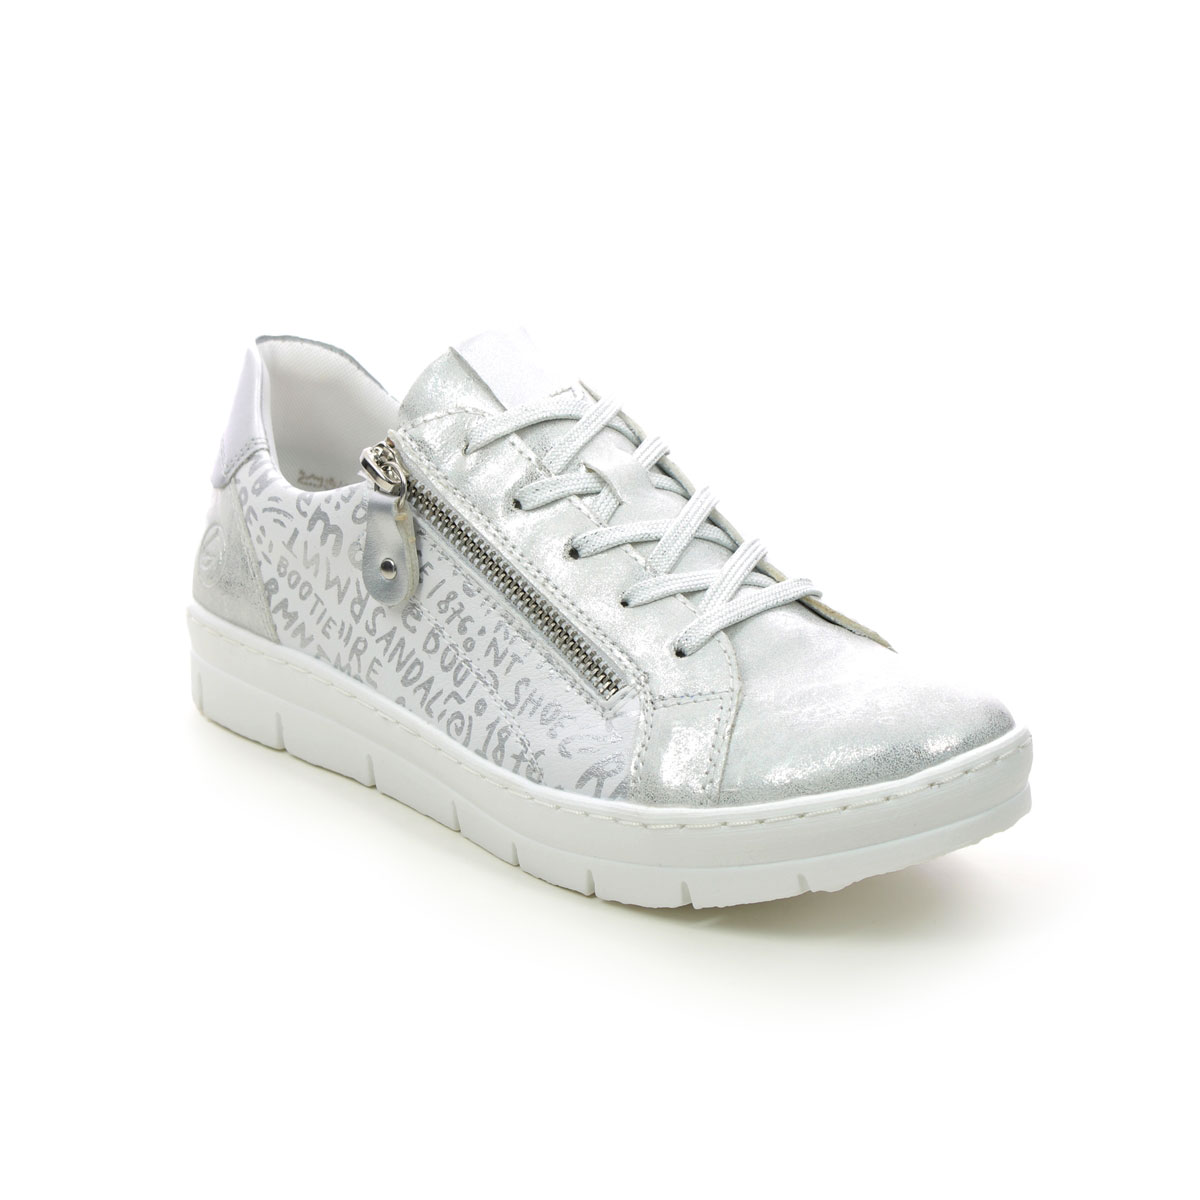 Remonte Ravenna 11 White Silver Womens Lacing Shoes D5821-80 In Size 38 In Plain White Silver